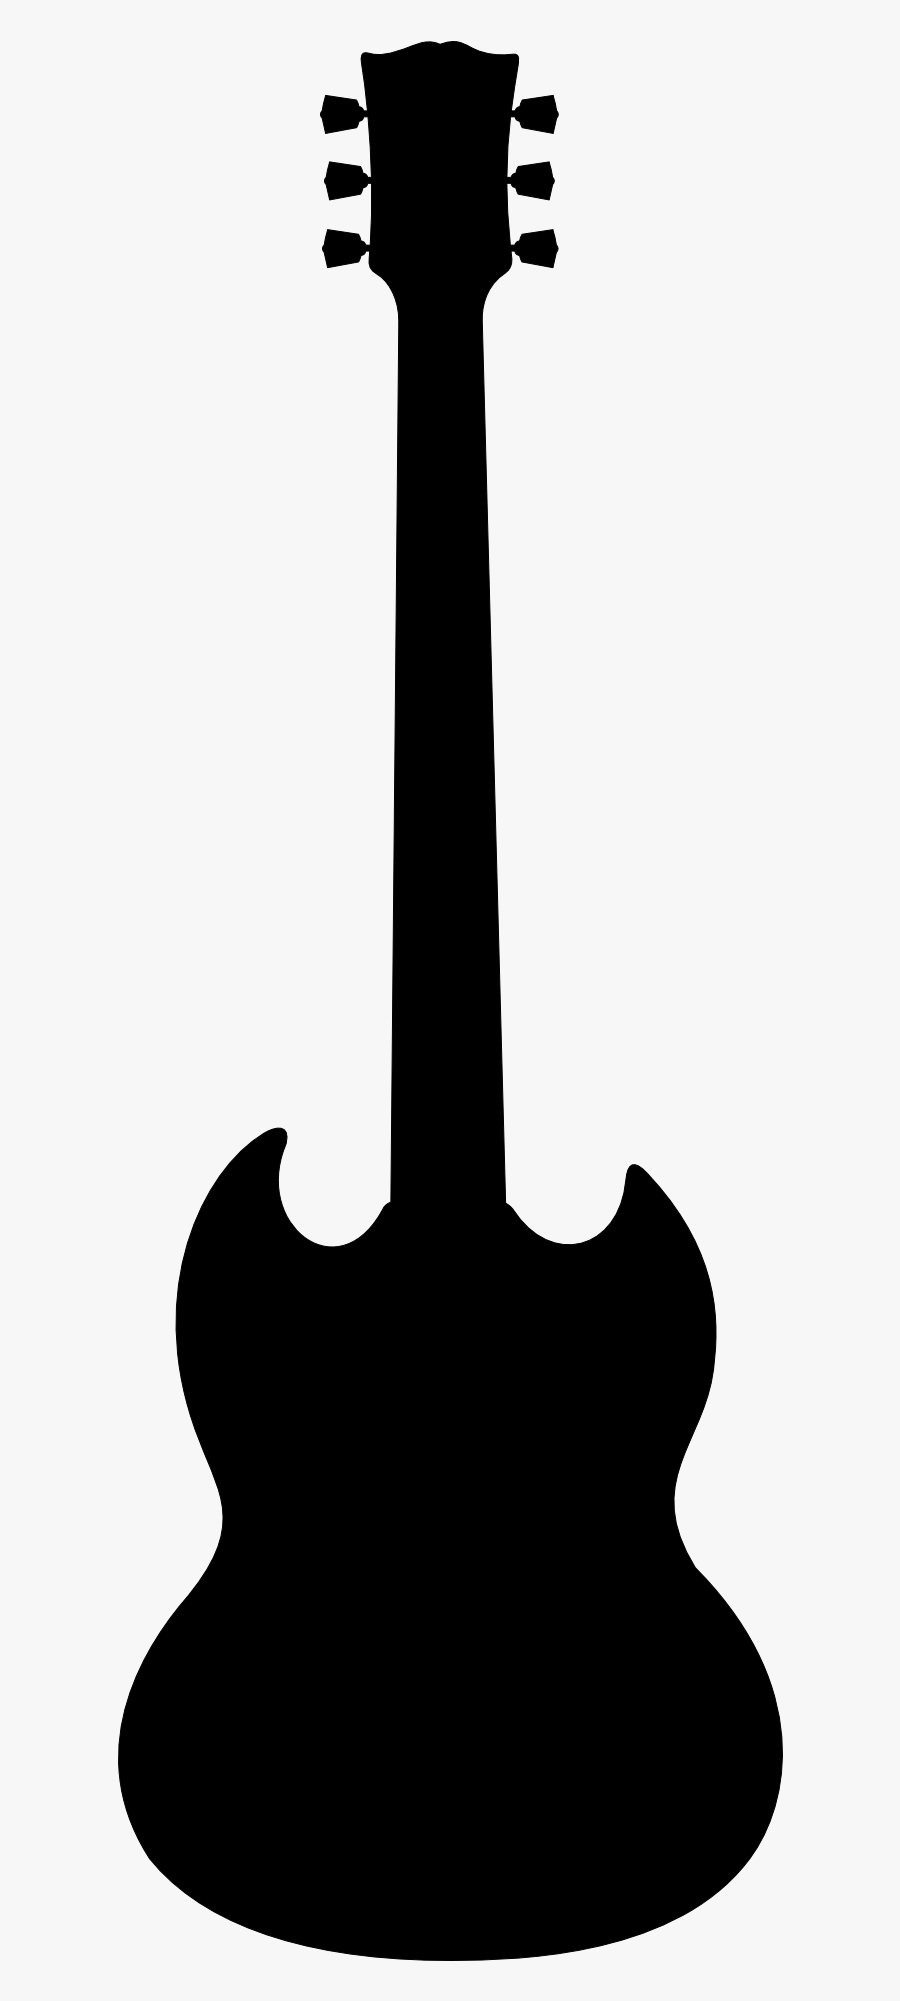 Guitarist Silhouette At Getdrawings - Sx Pirate Sg, Transparent Clipart